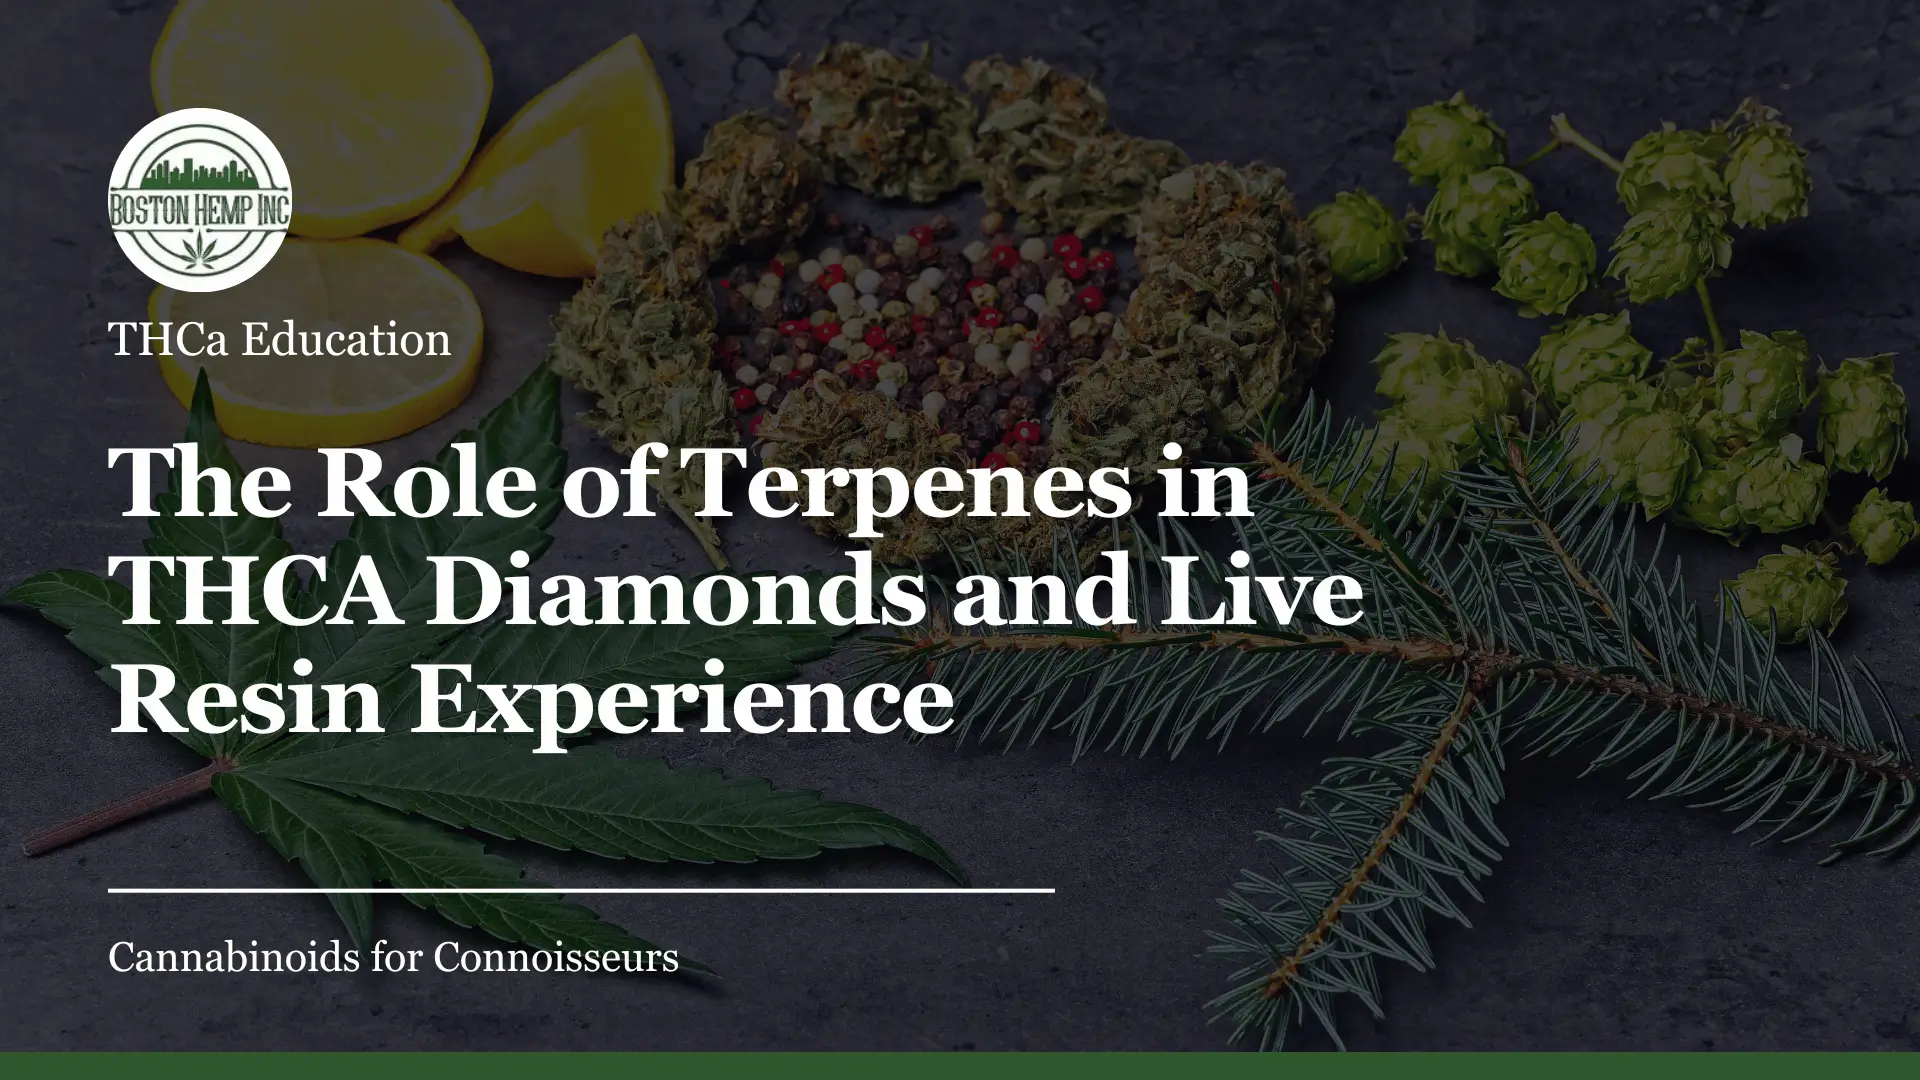 The Role of Terpenes in THCA Diamonds and Live Resin Experience